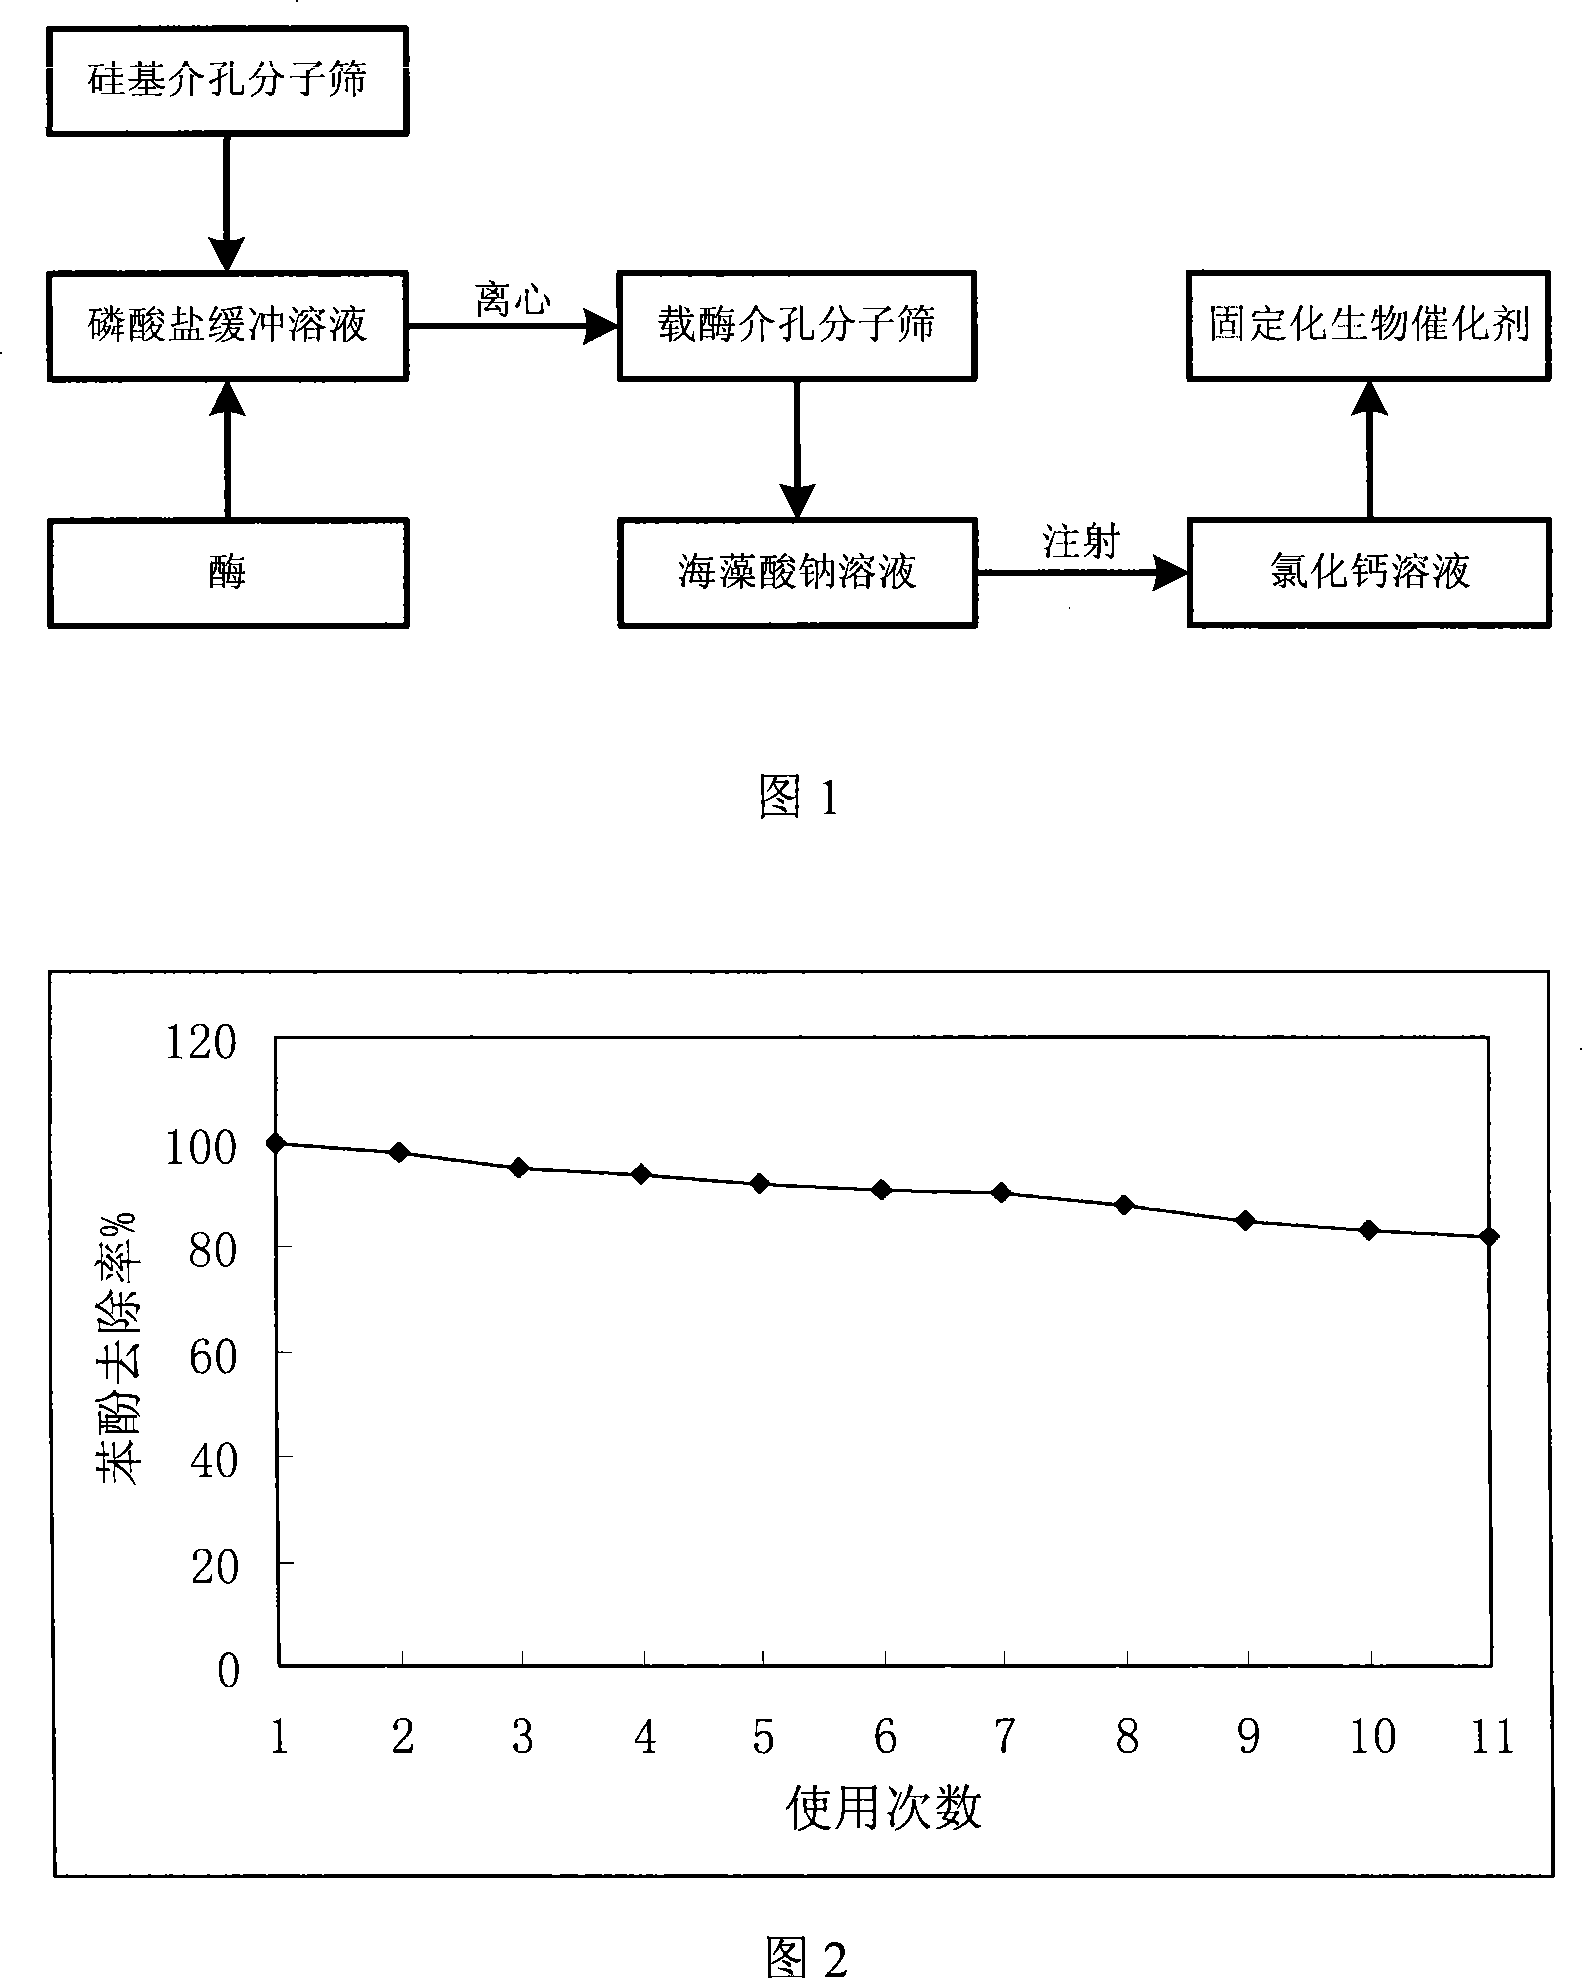 Method for preparing immobilized enzyme biological catalyst